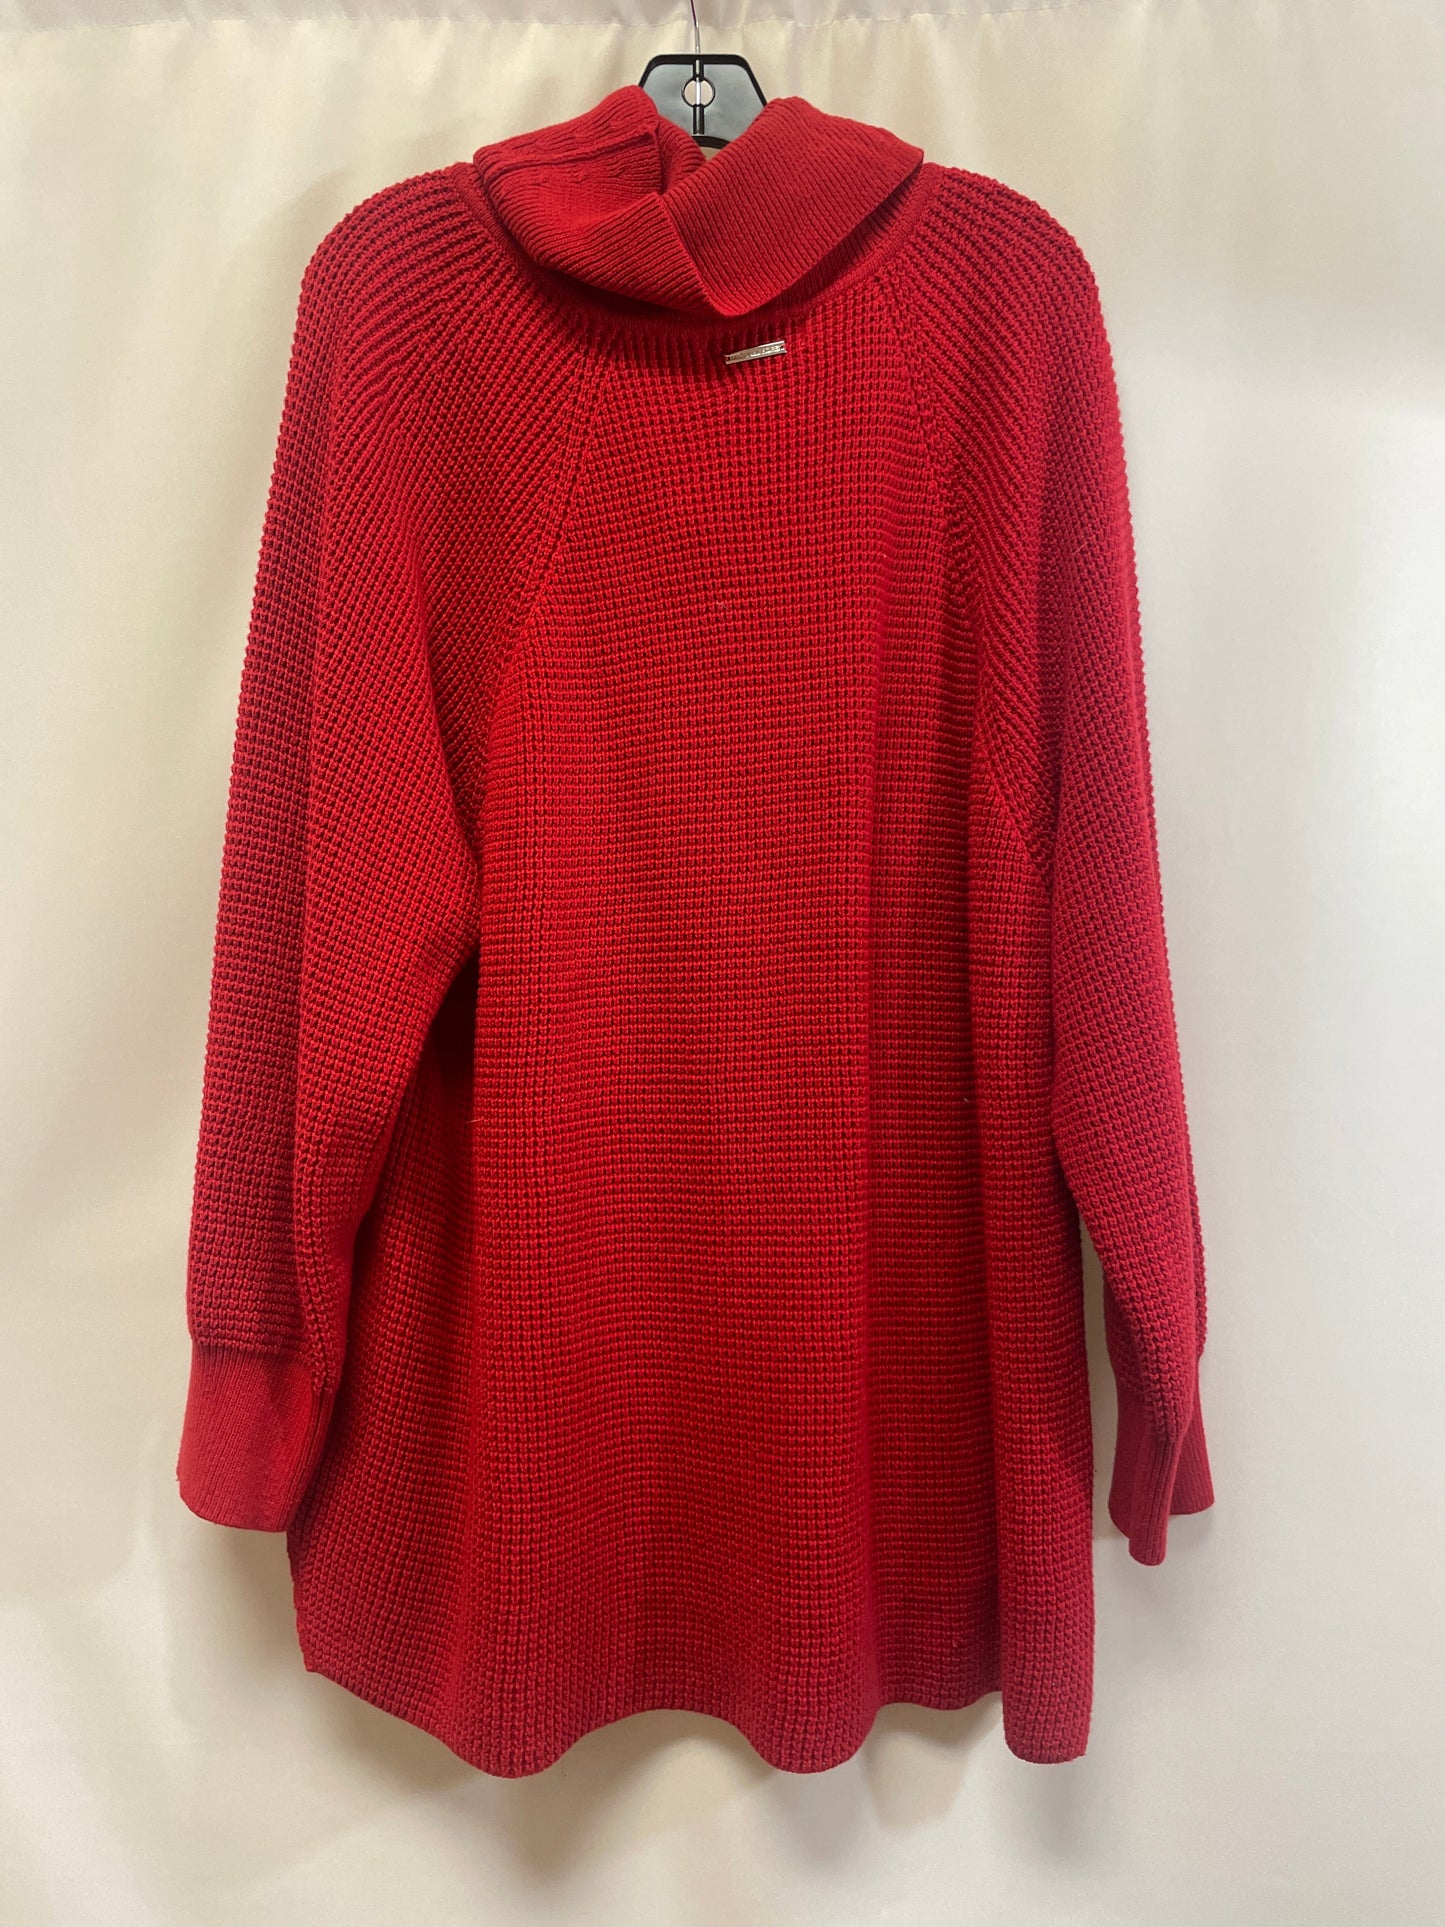 Red Sweater Michael By Michael Kors, Size 3x